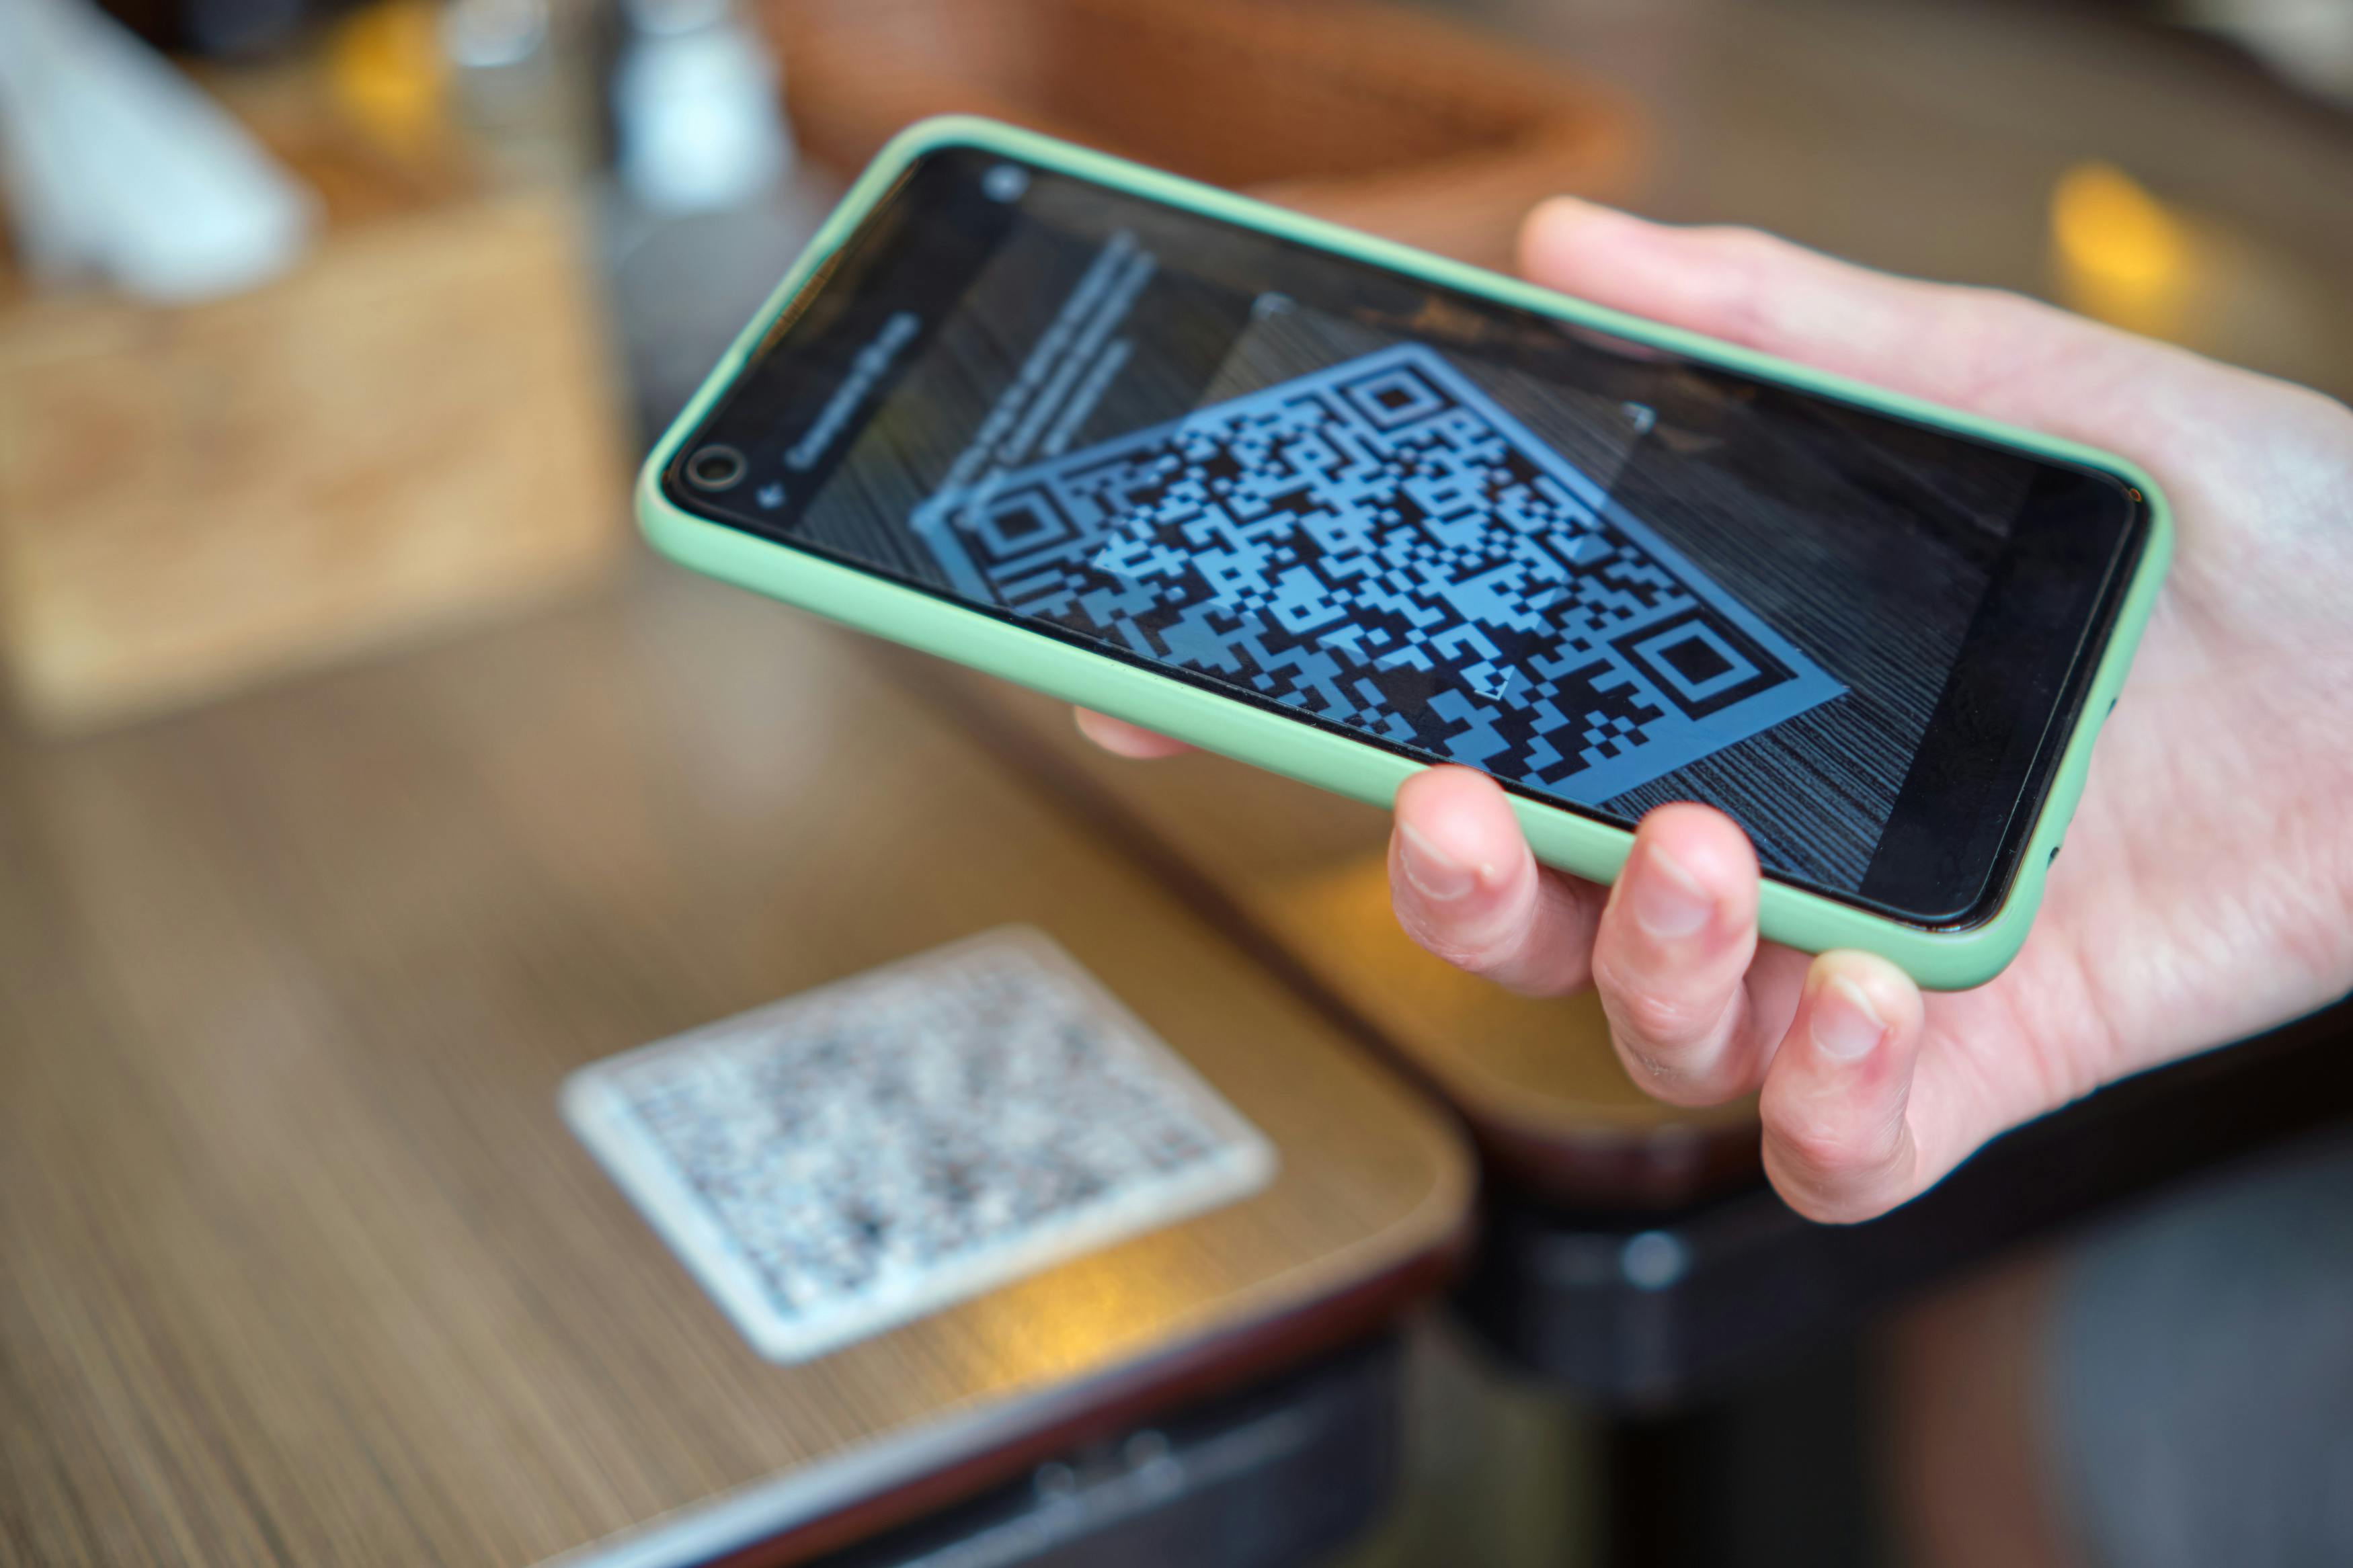 Closeup of someone scanning a QR code with a mobile phone